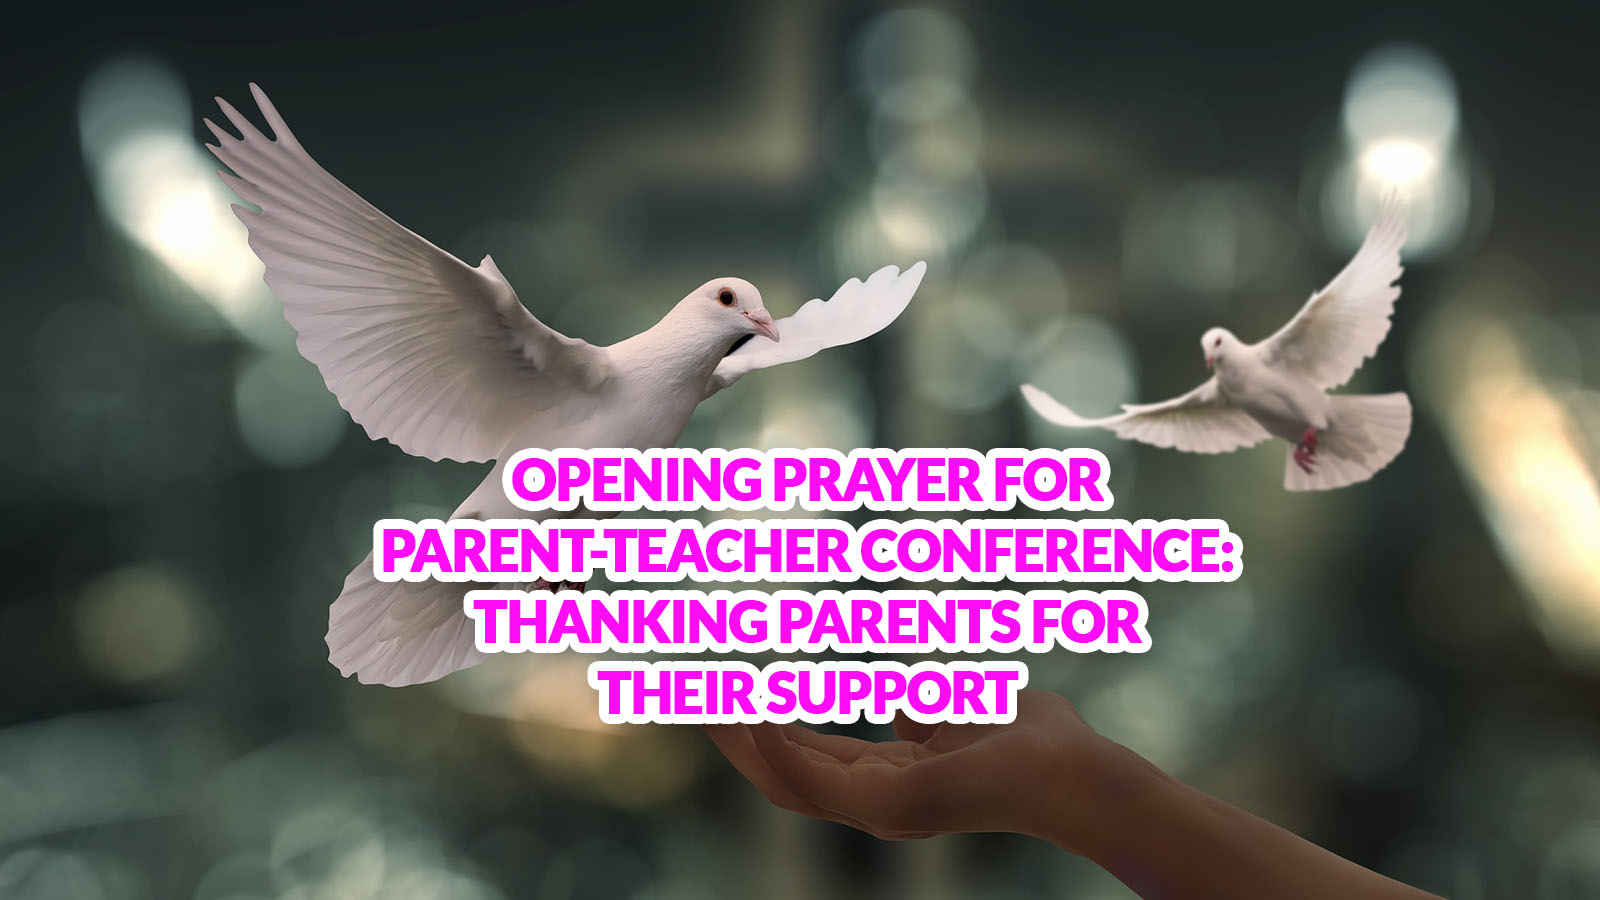 Opening Prayer for Parent-Teacher Conference: Thanking Parents for their Support